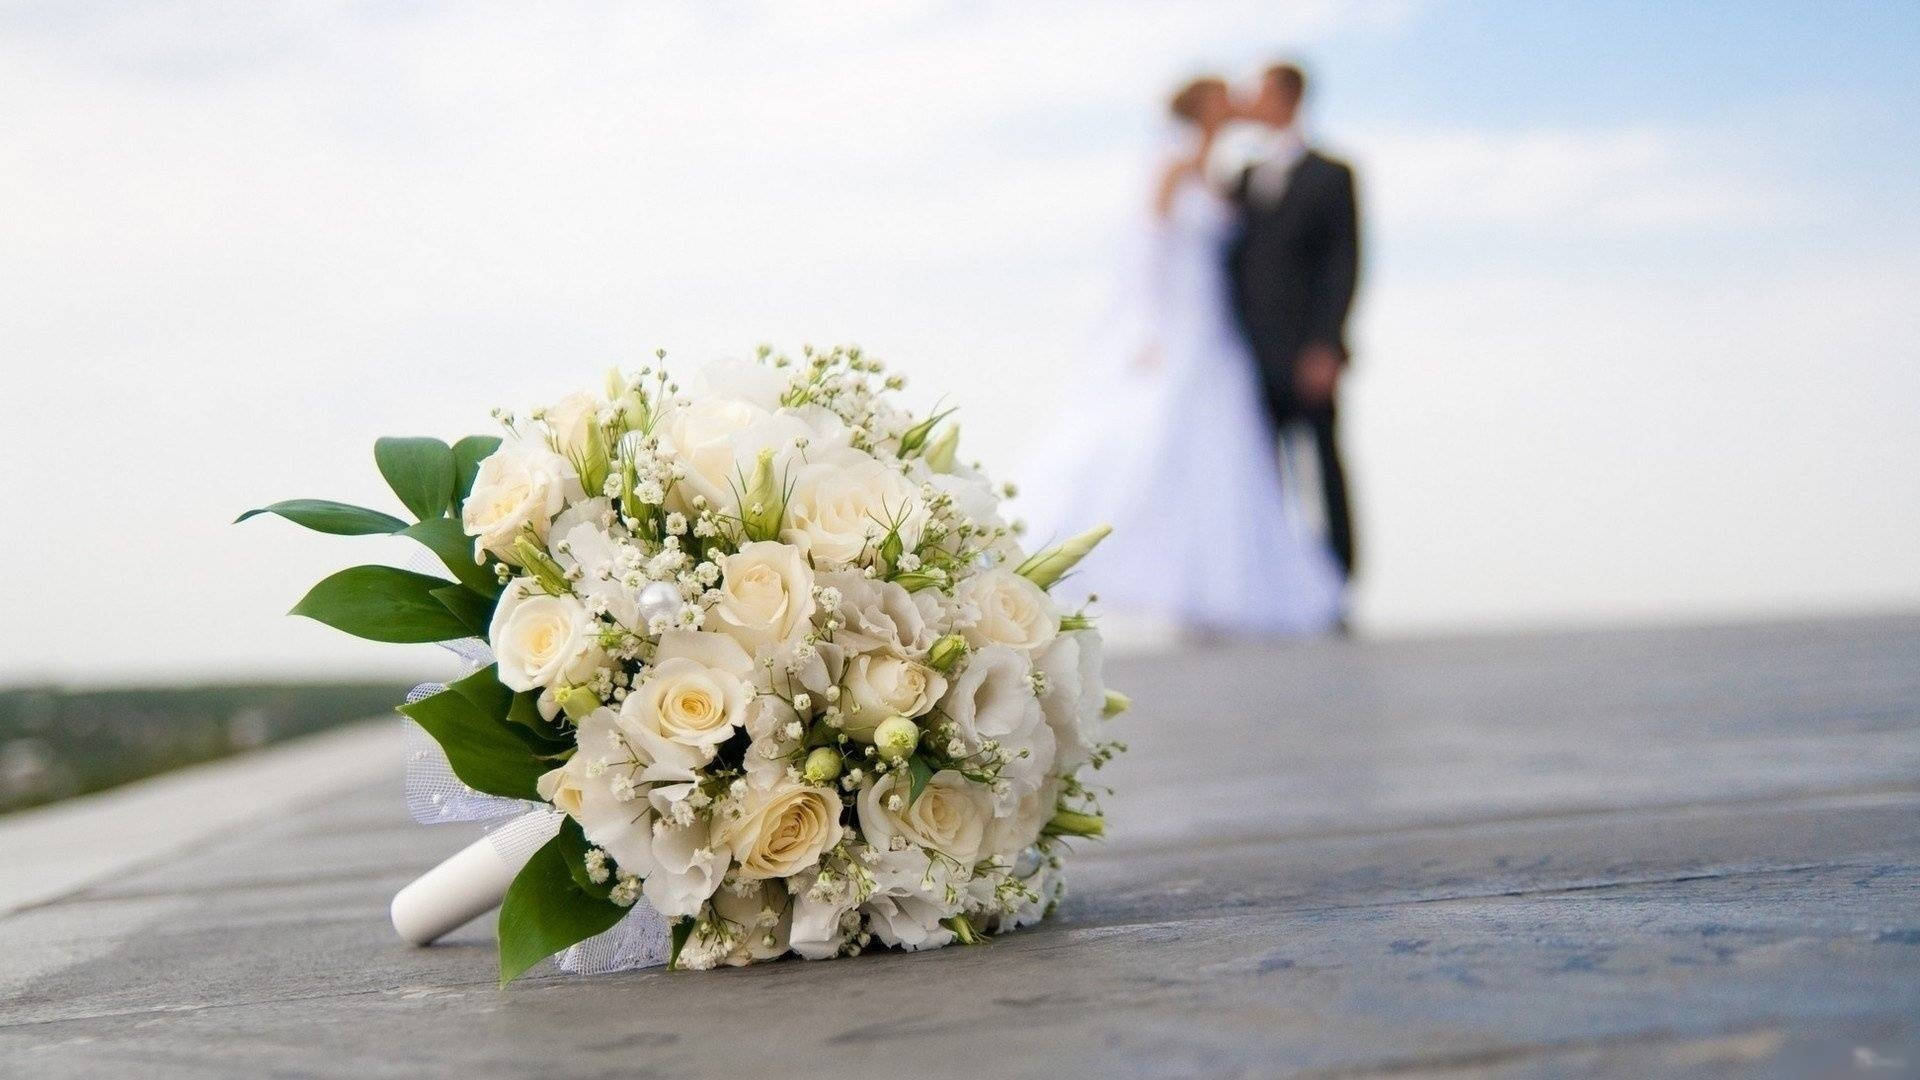 Romantic Couple Sharing A Kiss Behind A Vibrant Wedding Bouquet. Background